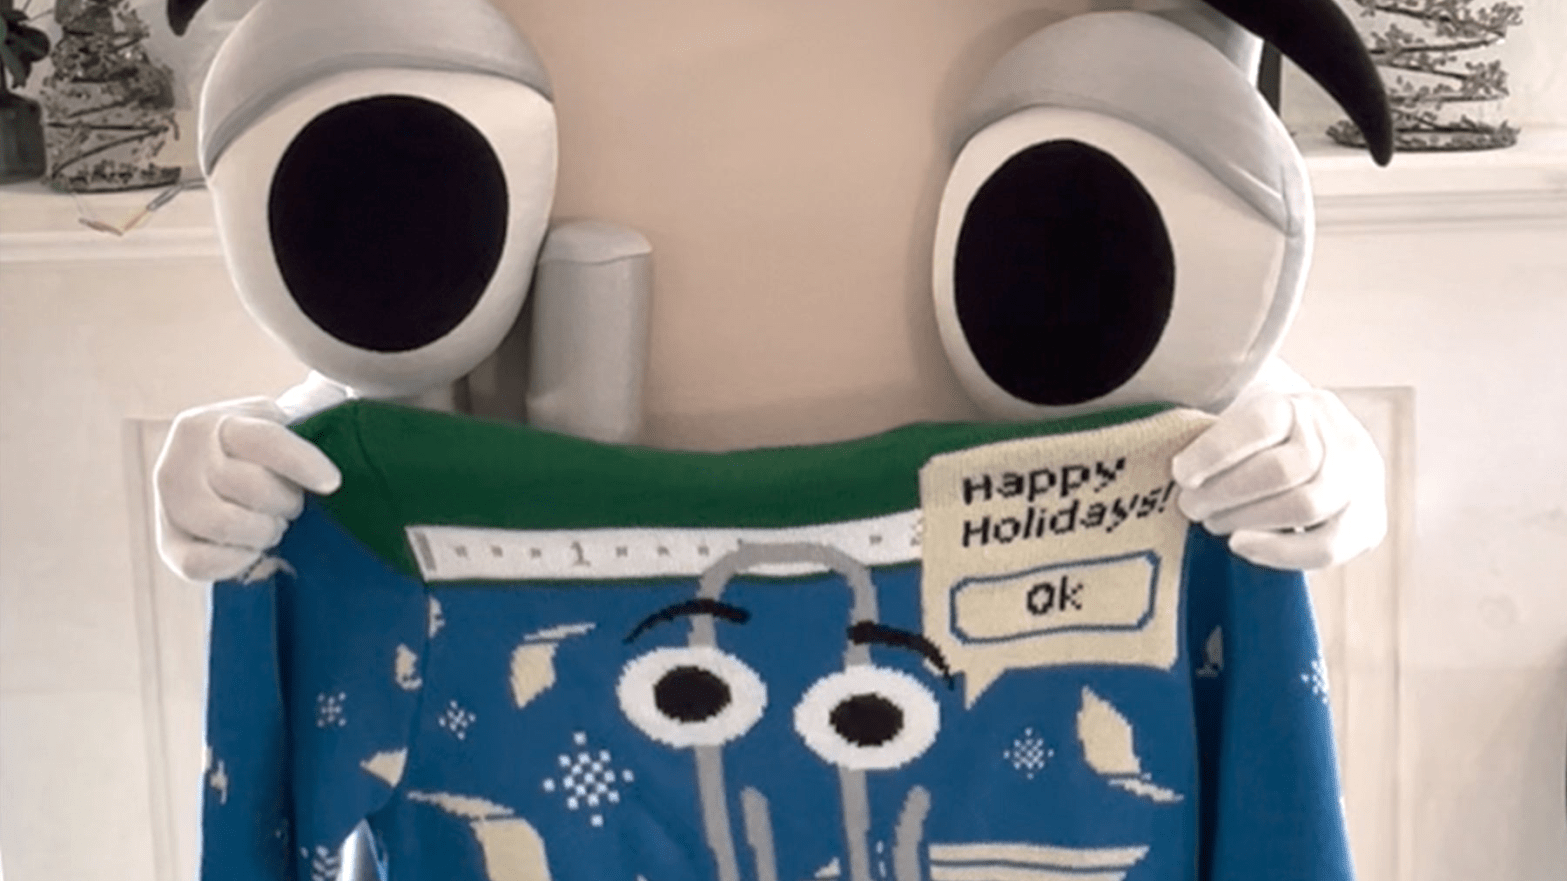 We tried on the holiday Clippy sweater. It was fine! (Image: Microsoft)